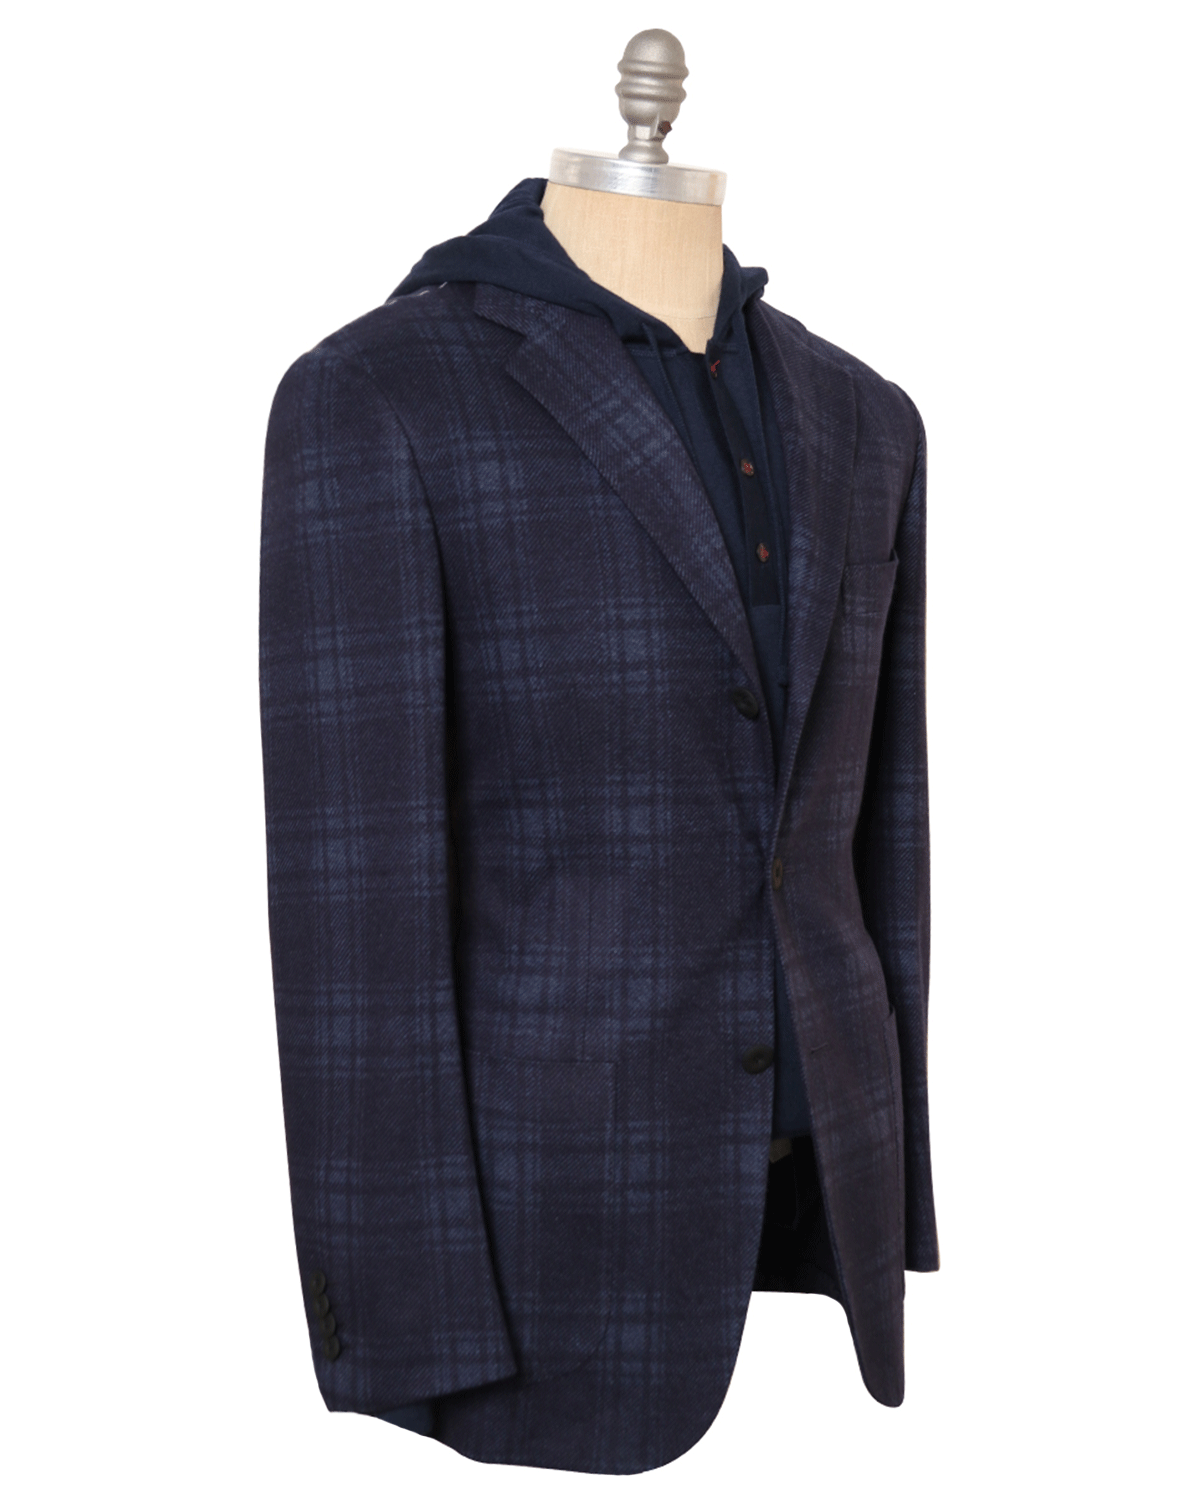 Blue and Light Blue Plaid Sportcoat